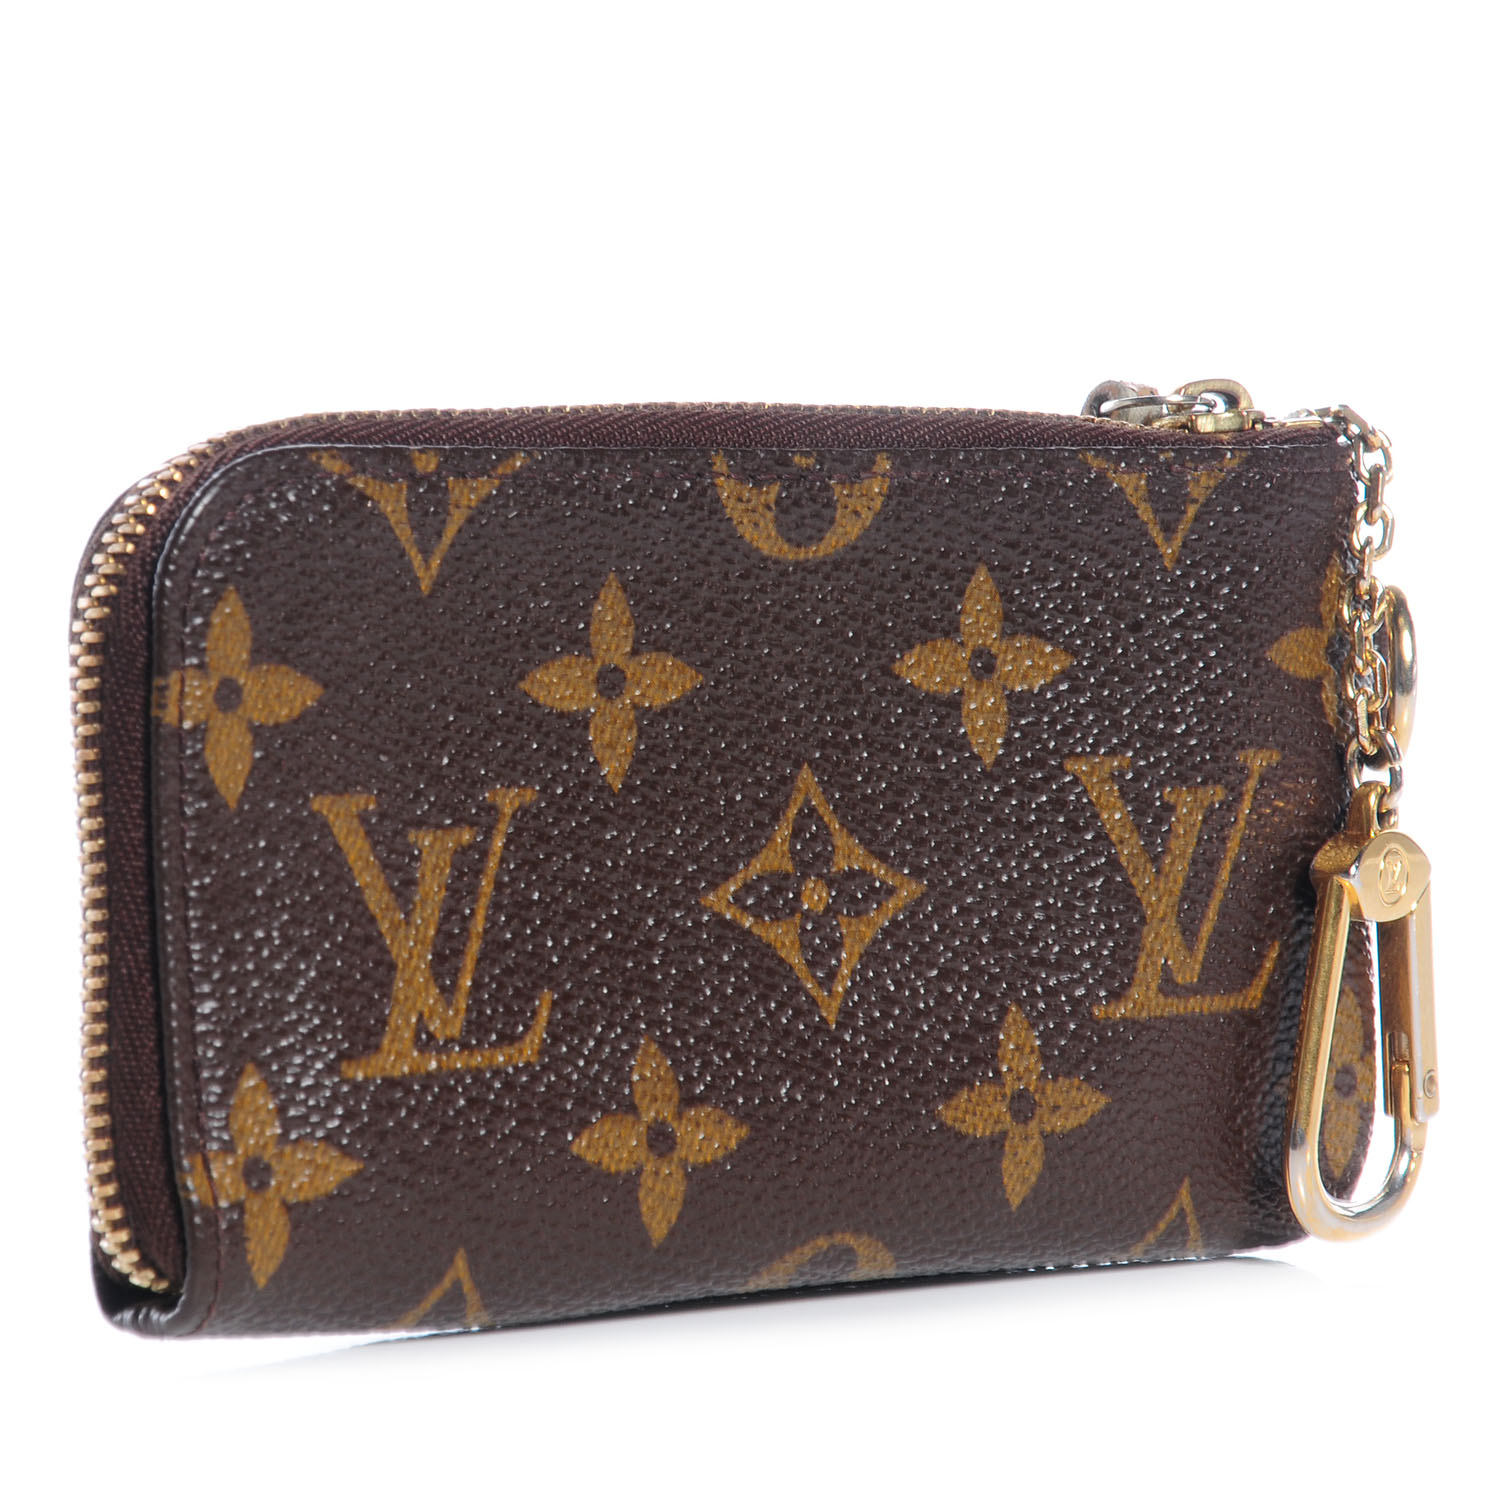 LOUIS VUITTON Monogram Complice Trunks and Bags Key Pouch 71318